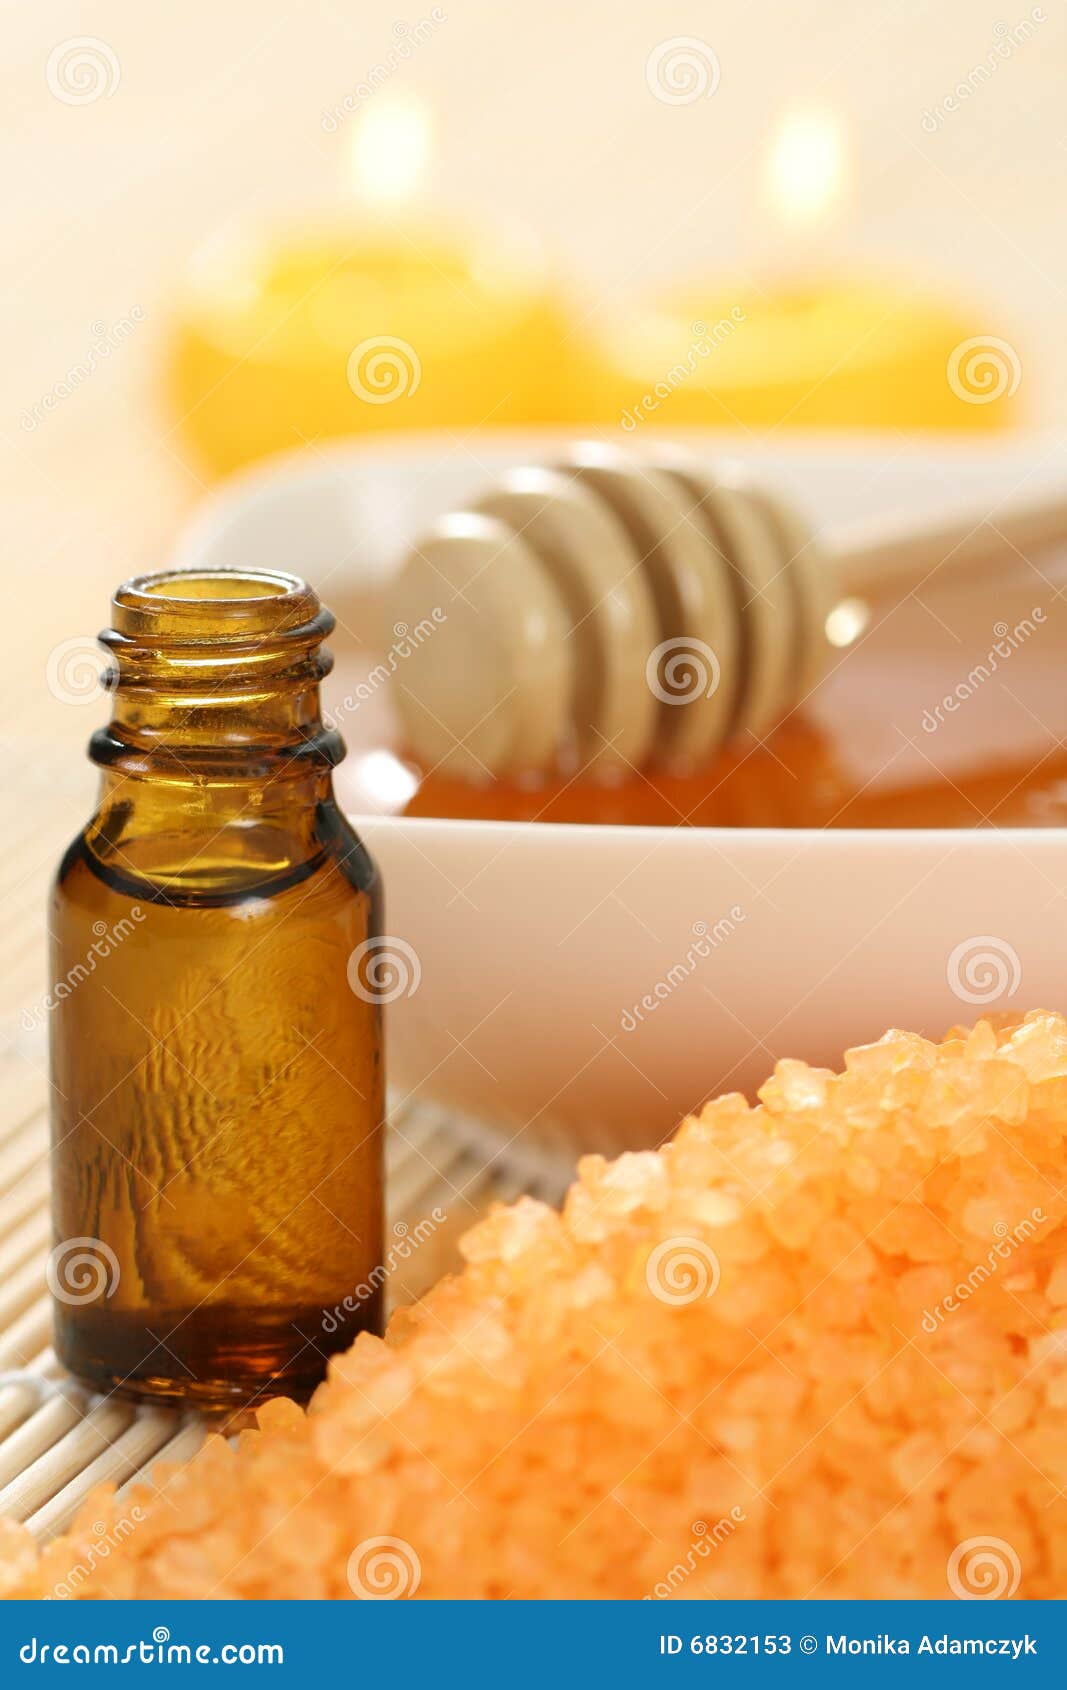 Honey essential oil stock image. Image of wellbeing, body - 6832153